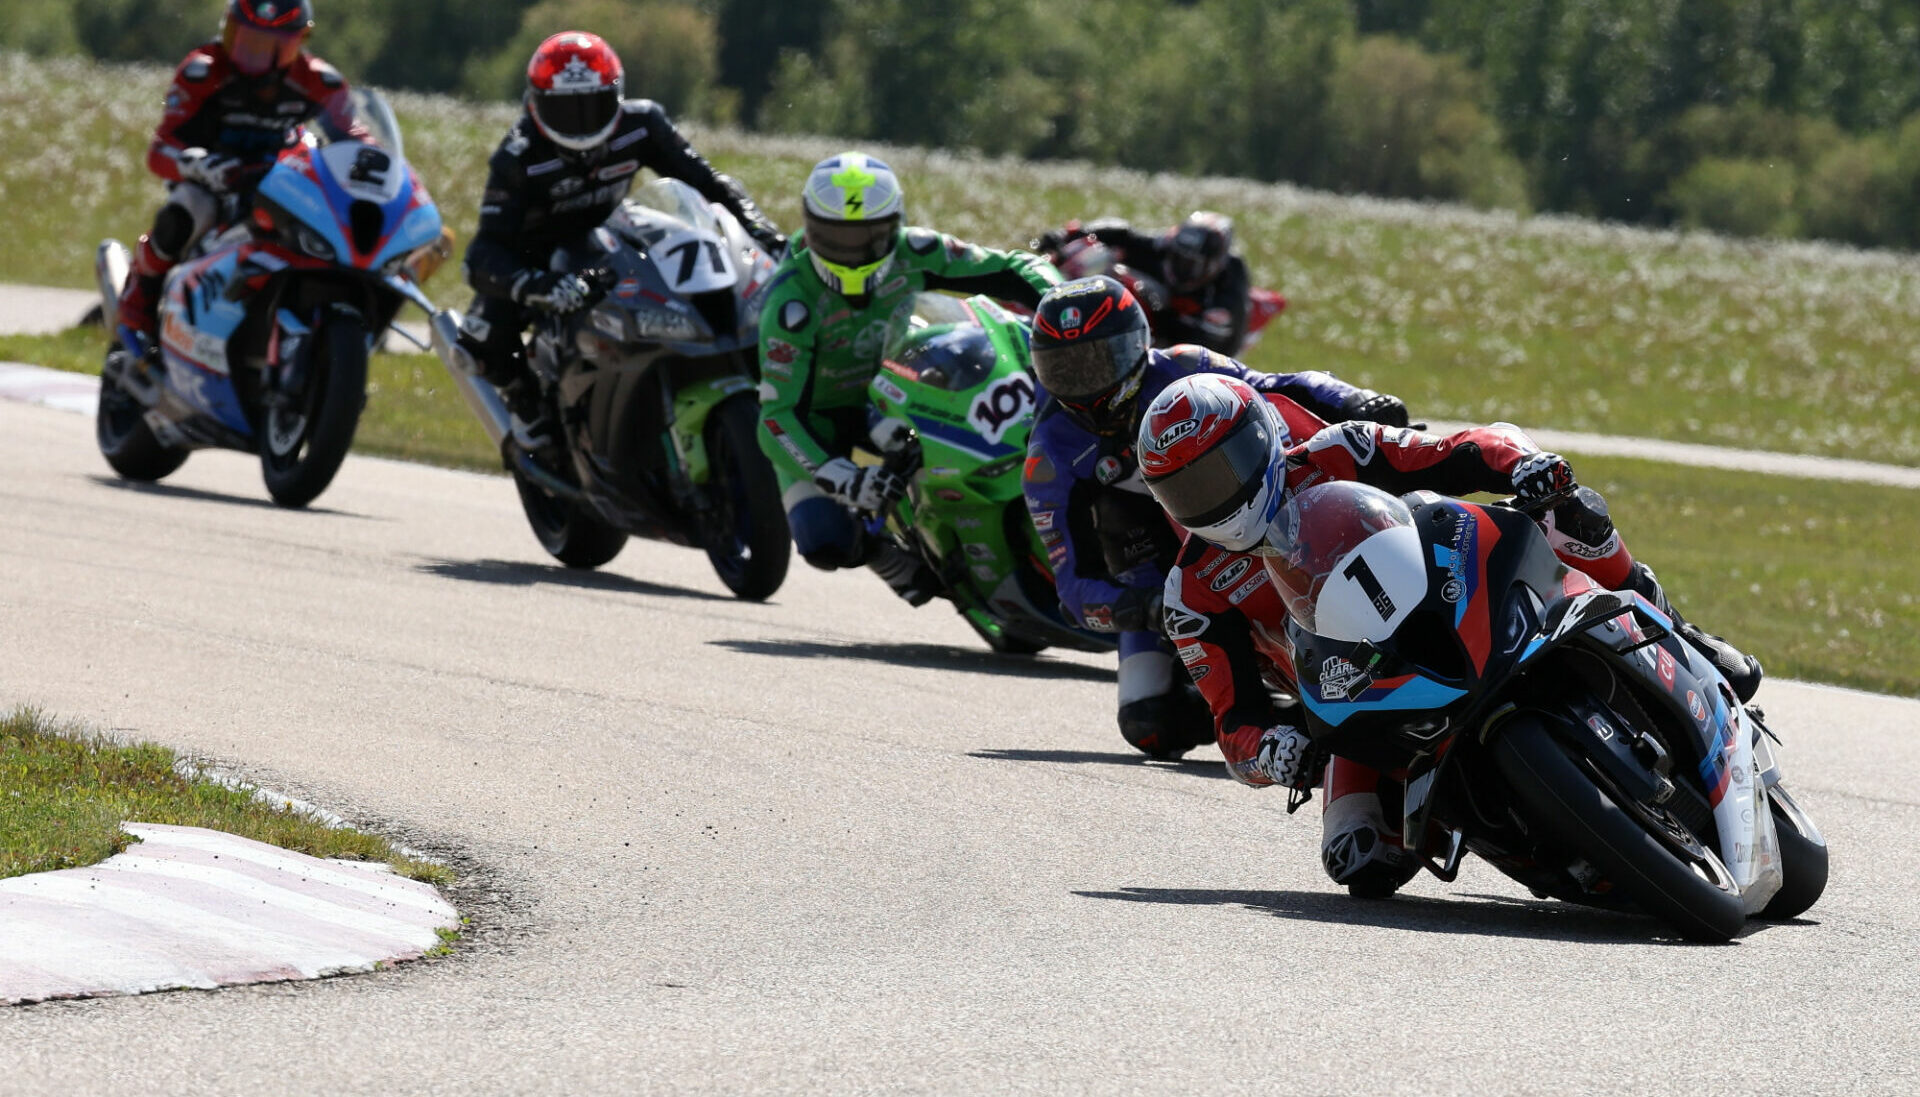 Ben Young (1) will have the usual suspects and a few more to contend with at Canadian Tire Motorsport Park this weekend as he tries to secure his fourth CSBK championship. Pictured behind Young are four of his closest challengers for round five - Alex Dumas, Jordan Szoke (101), Torin Collins (71), and Sam Guerin (2). Photo by Rob O'Brien, courtesy CSBK.